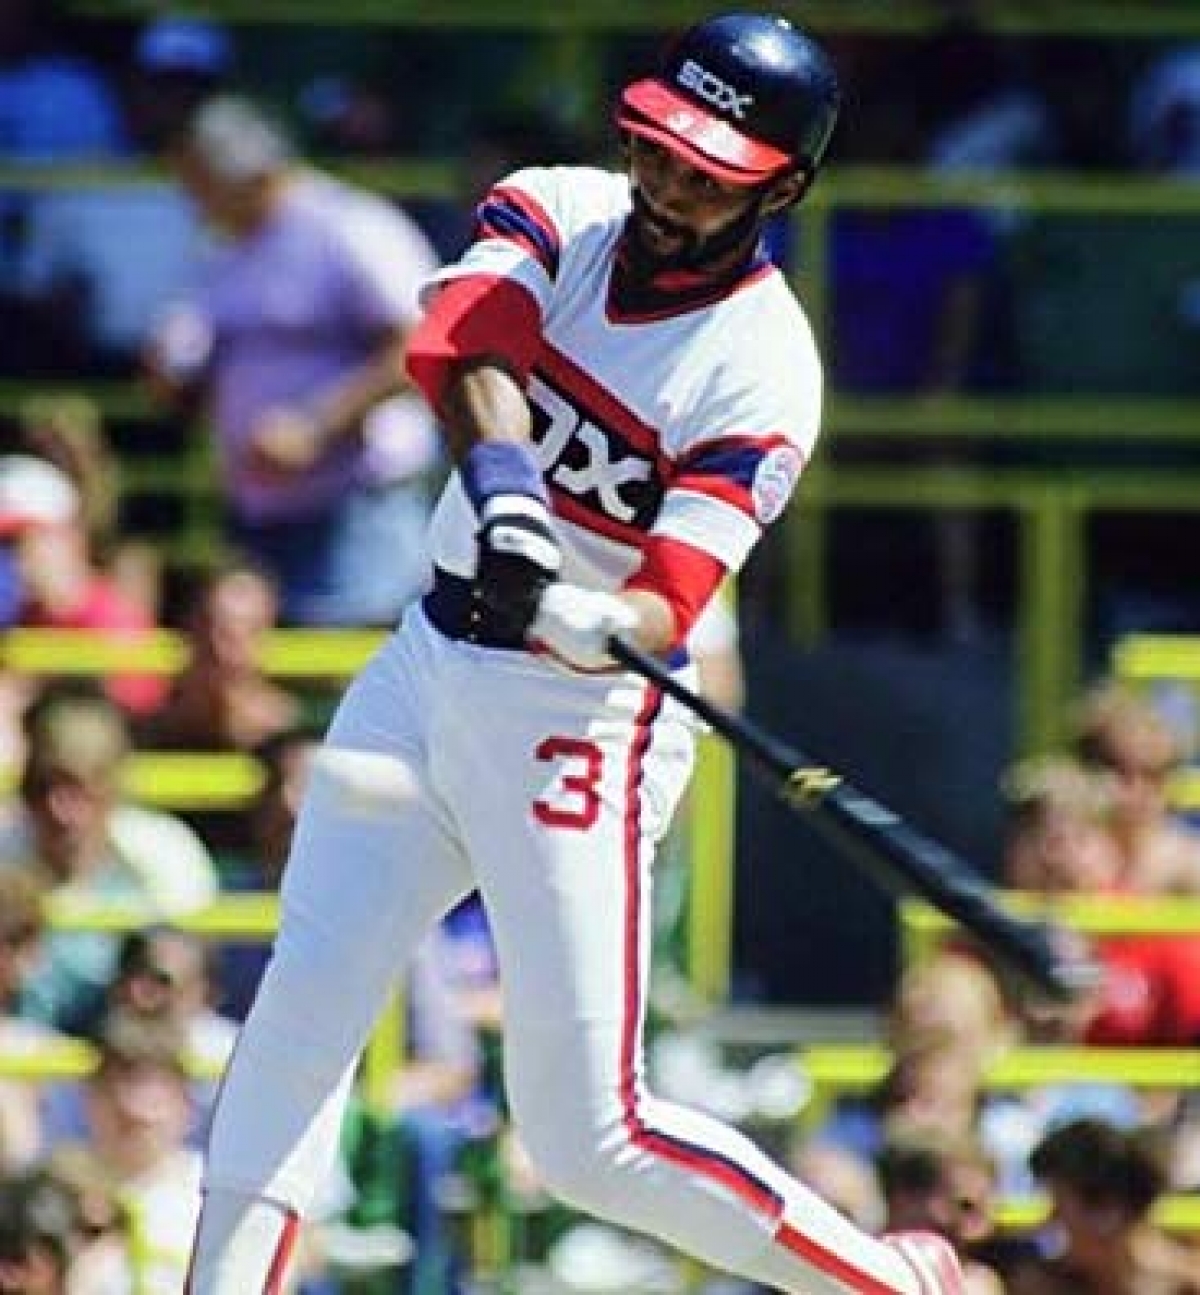 Not in Hall of Fame - 24. Harold Baines